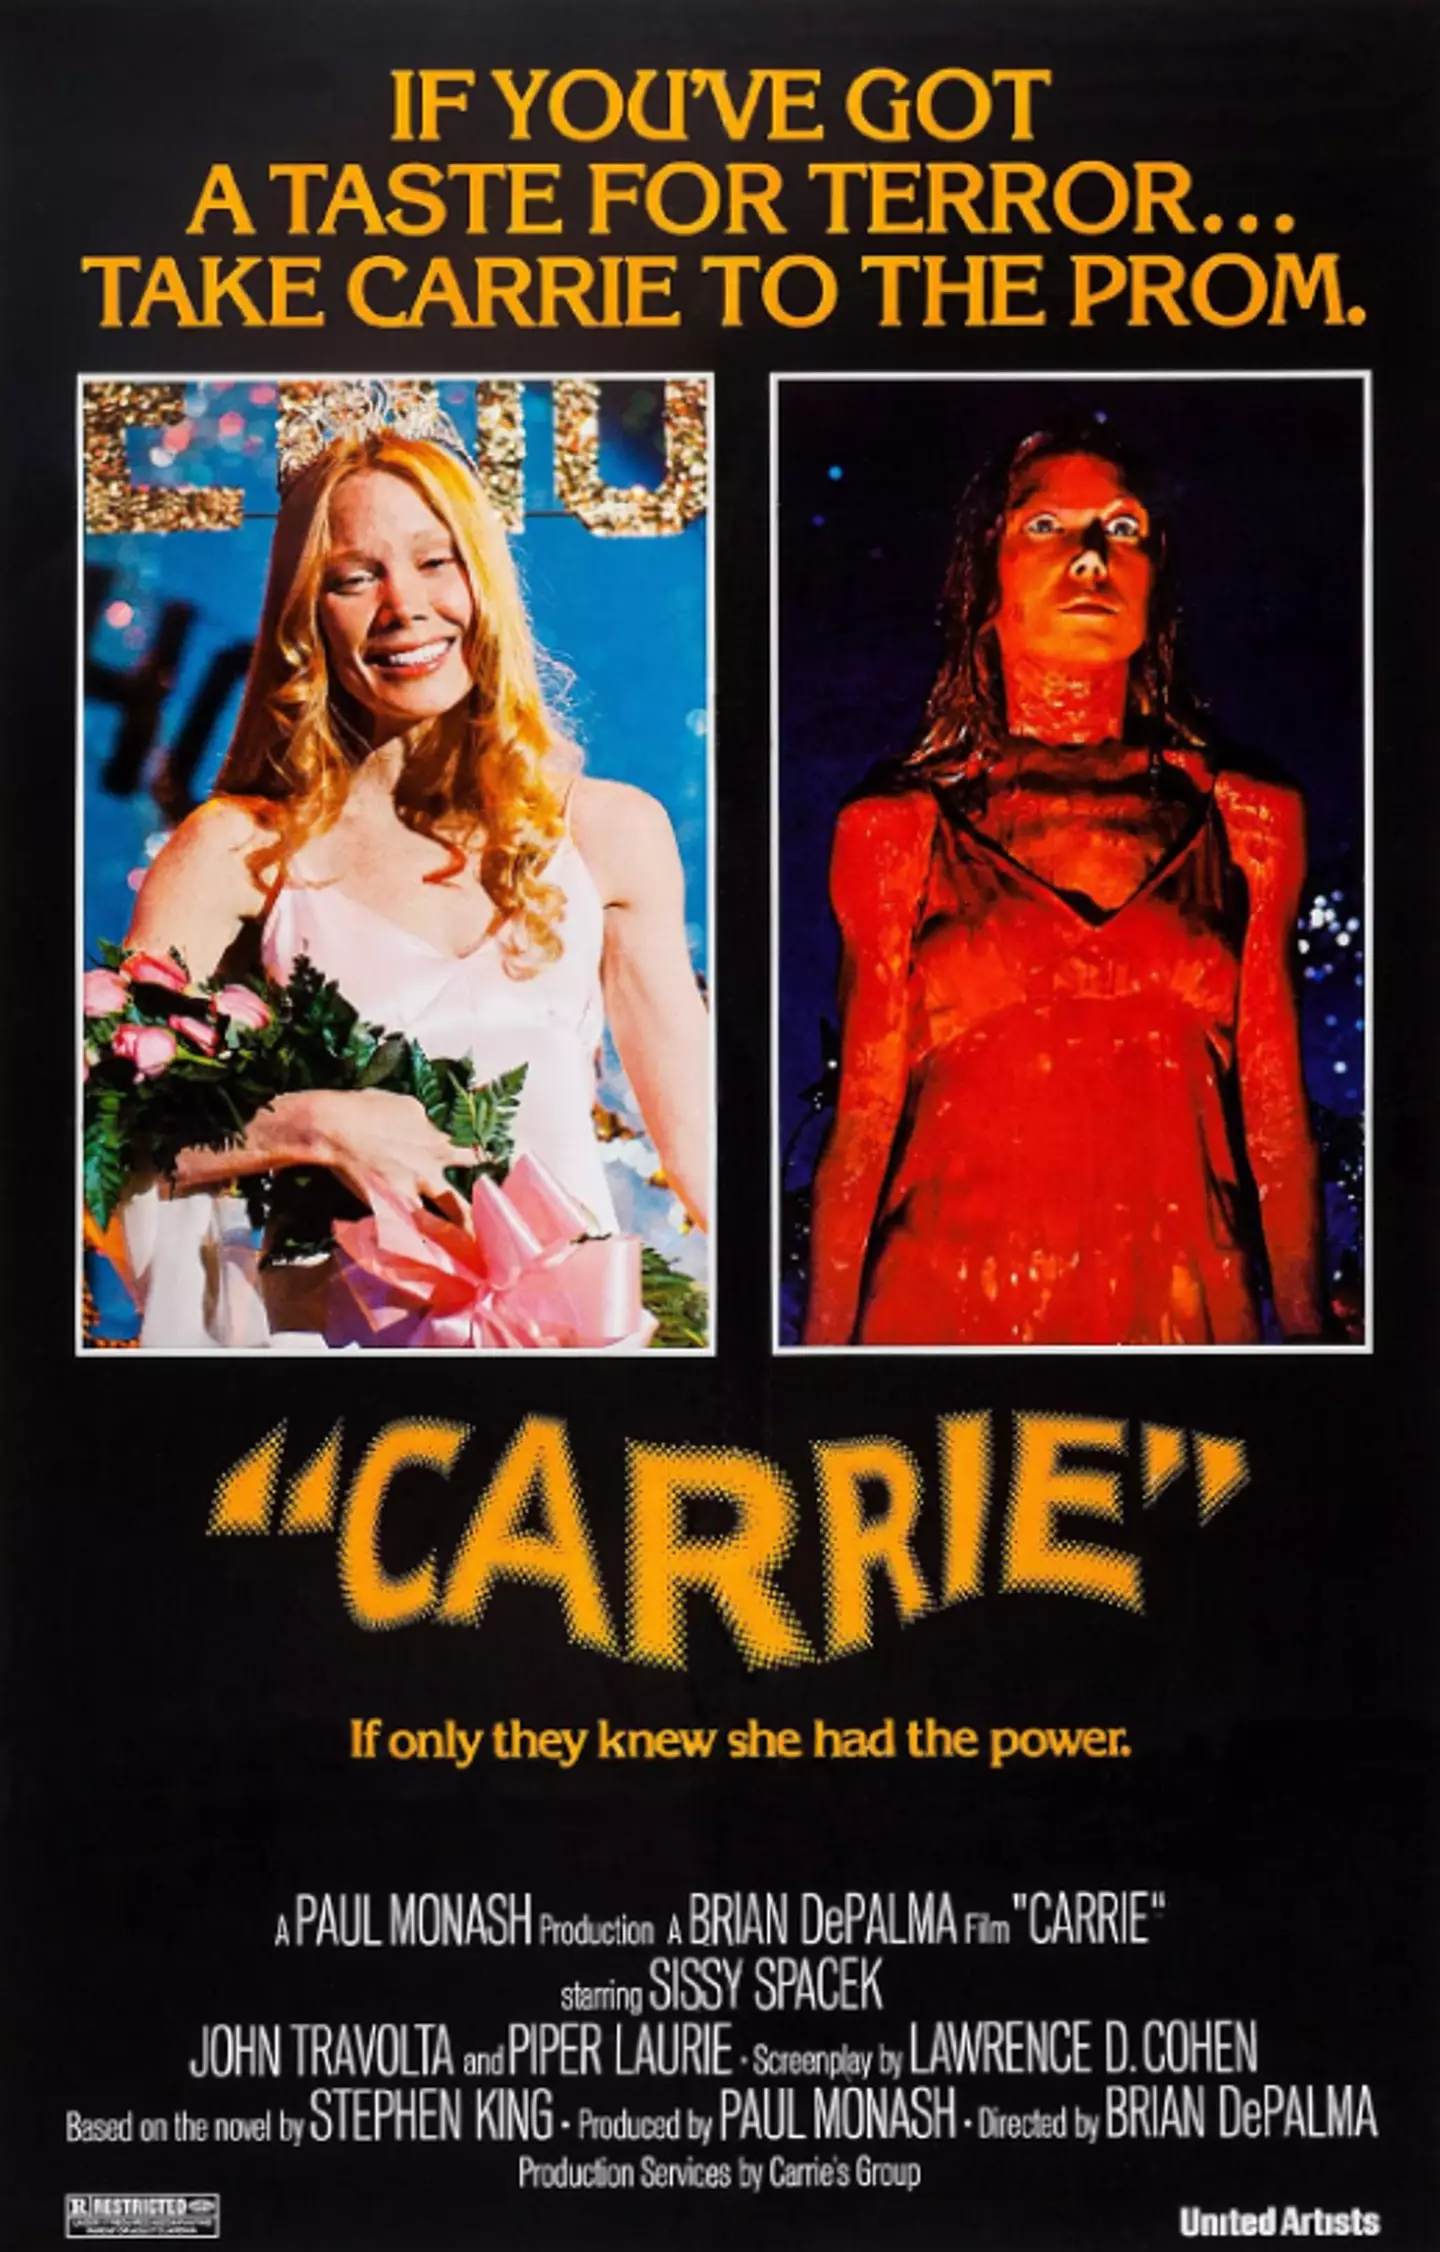 Carrie inspired a lot of Tarantino's future work.